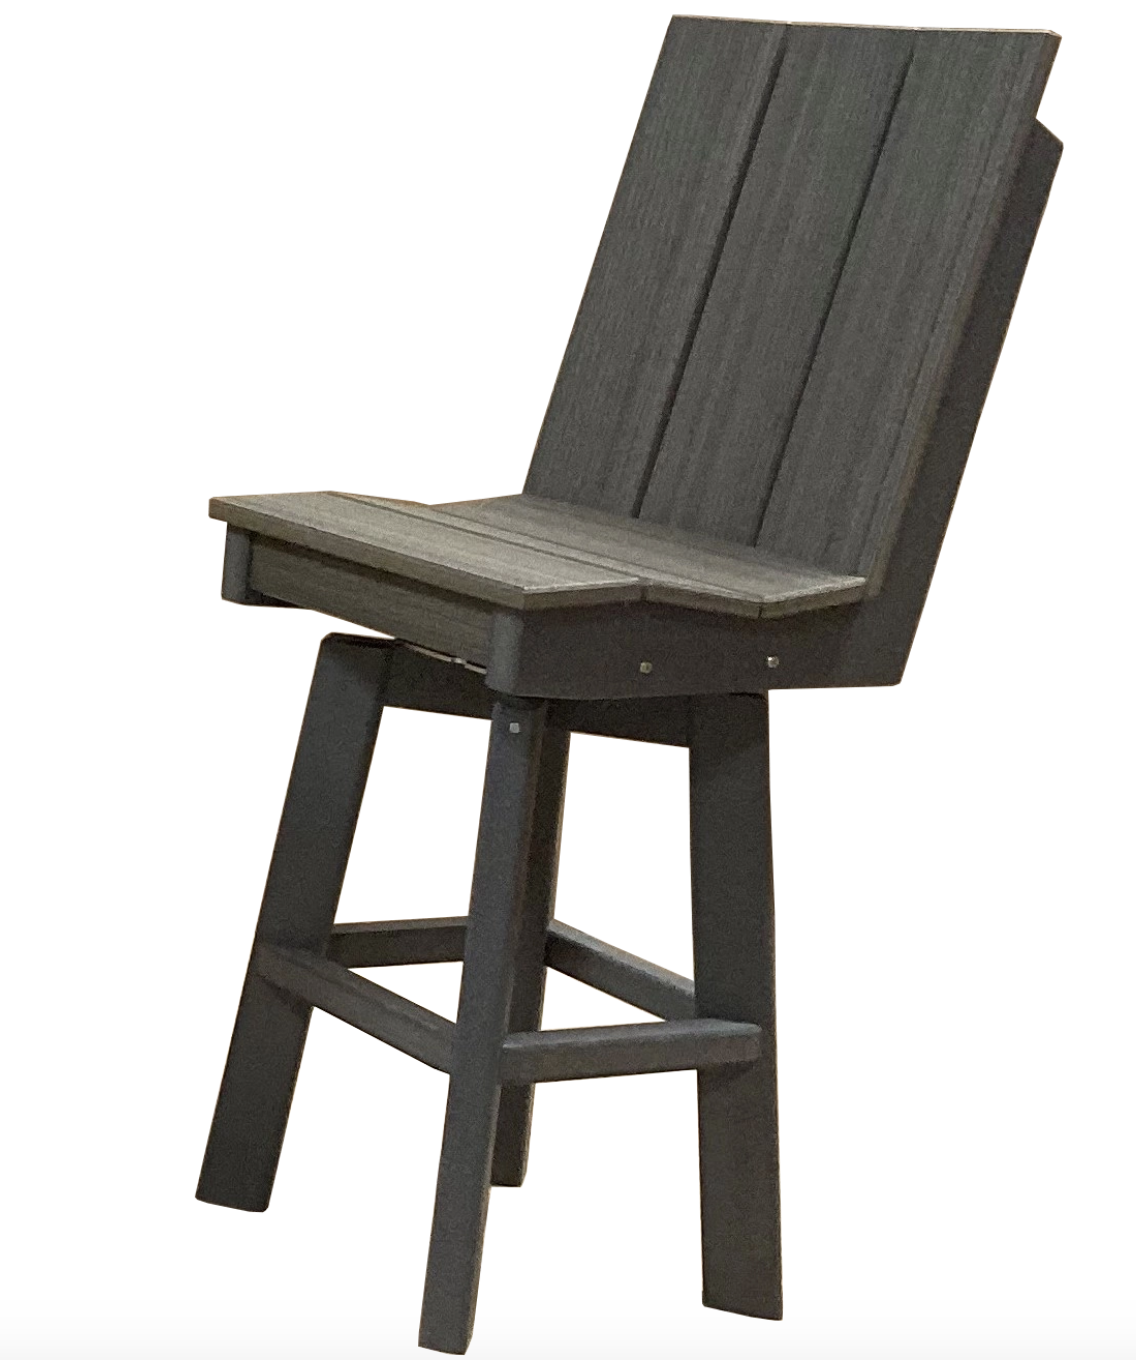 Perfect Choice Furniture Recycled Plastic Stanton Swivel Bar Height Armless Chair - LEAD TIME TO SHIP 4 WEEKS OR LESS